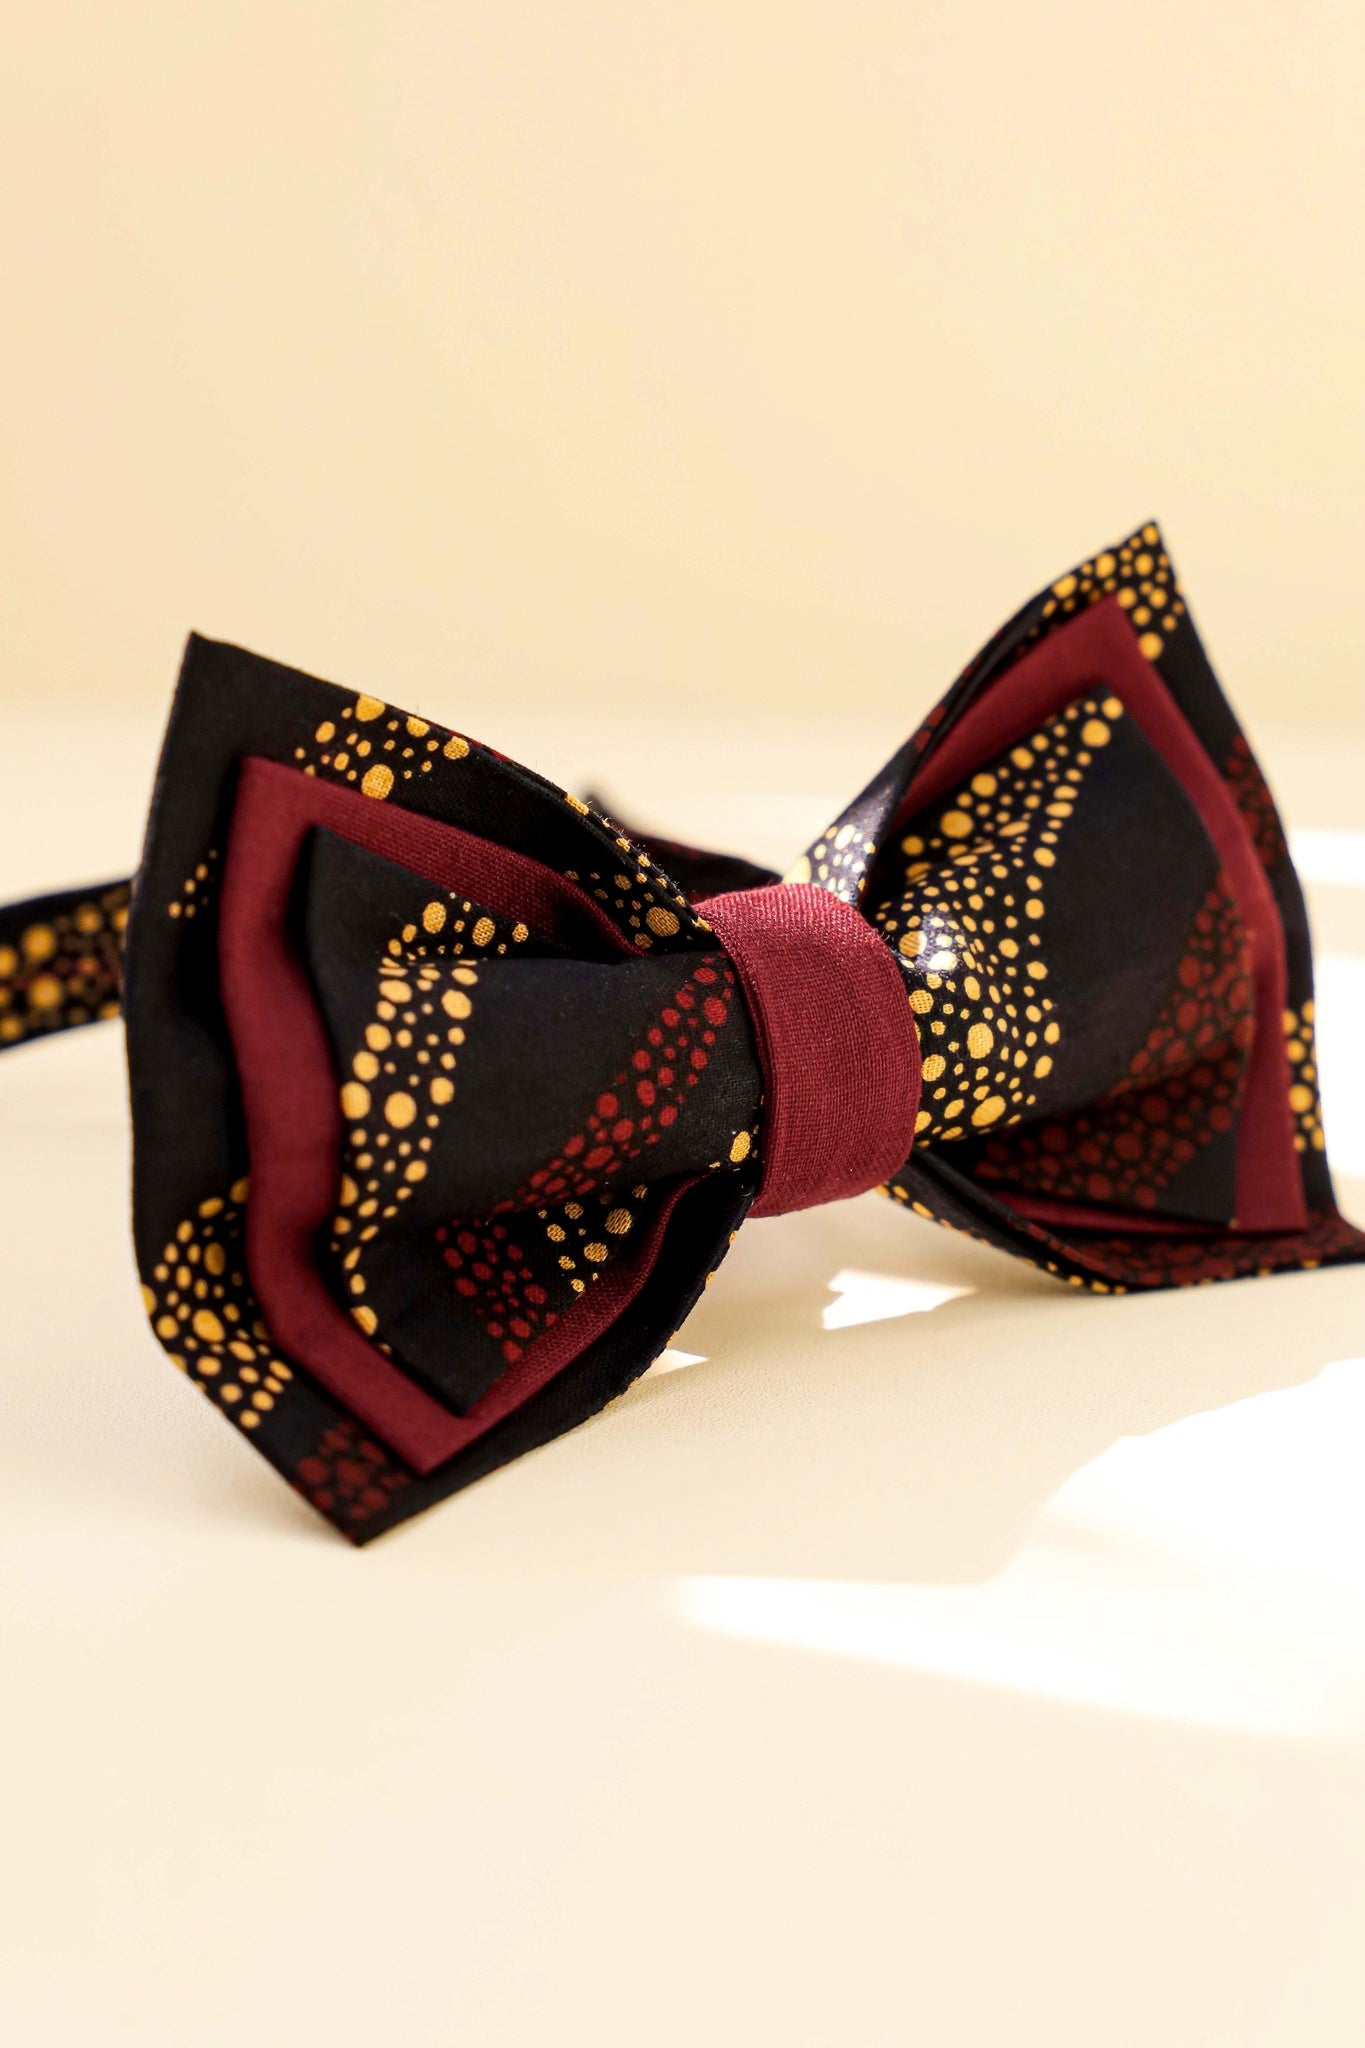 Premium quality African print pre-tied bowties by GabeJade. Our Ankara pre-tied bowties are perfect for any occasion, are designed to go perfectly with any outfit, and make great gifts. Choose from our endless patterns and colorful African pre-tied bowtie